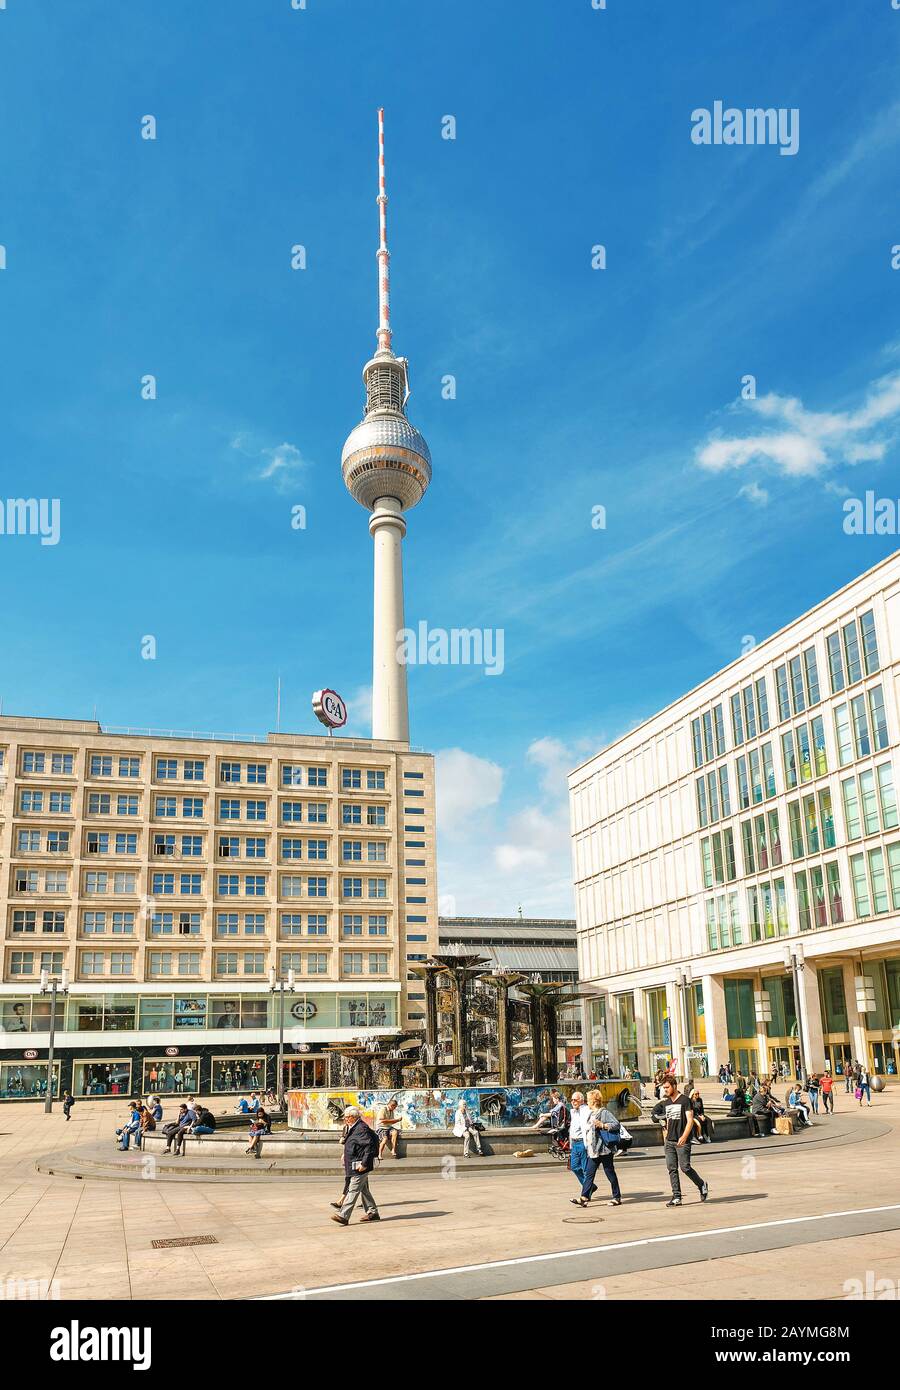 17 MAY 2018, BERLIN, GERMANY: Panoramic view of Alexanderplatz square with famous TV tower and crowds of people Stock Photo